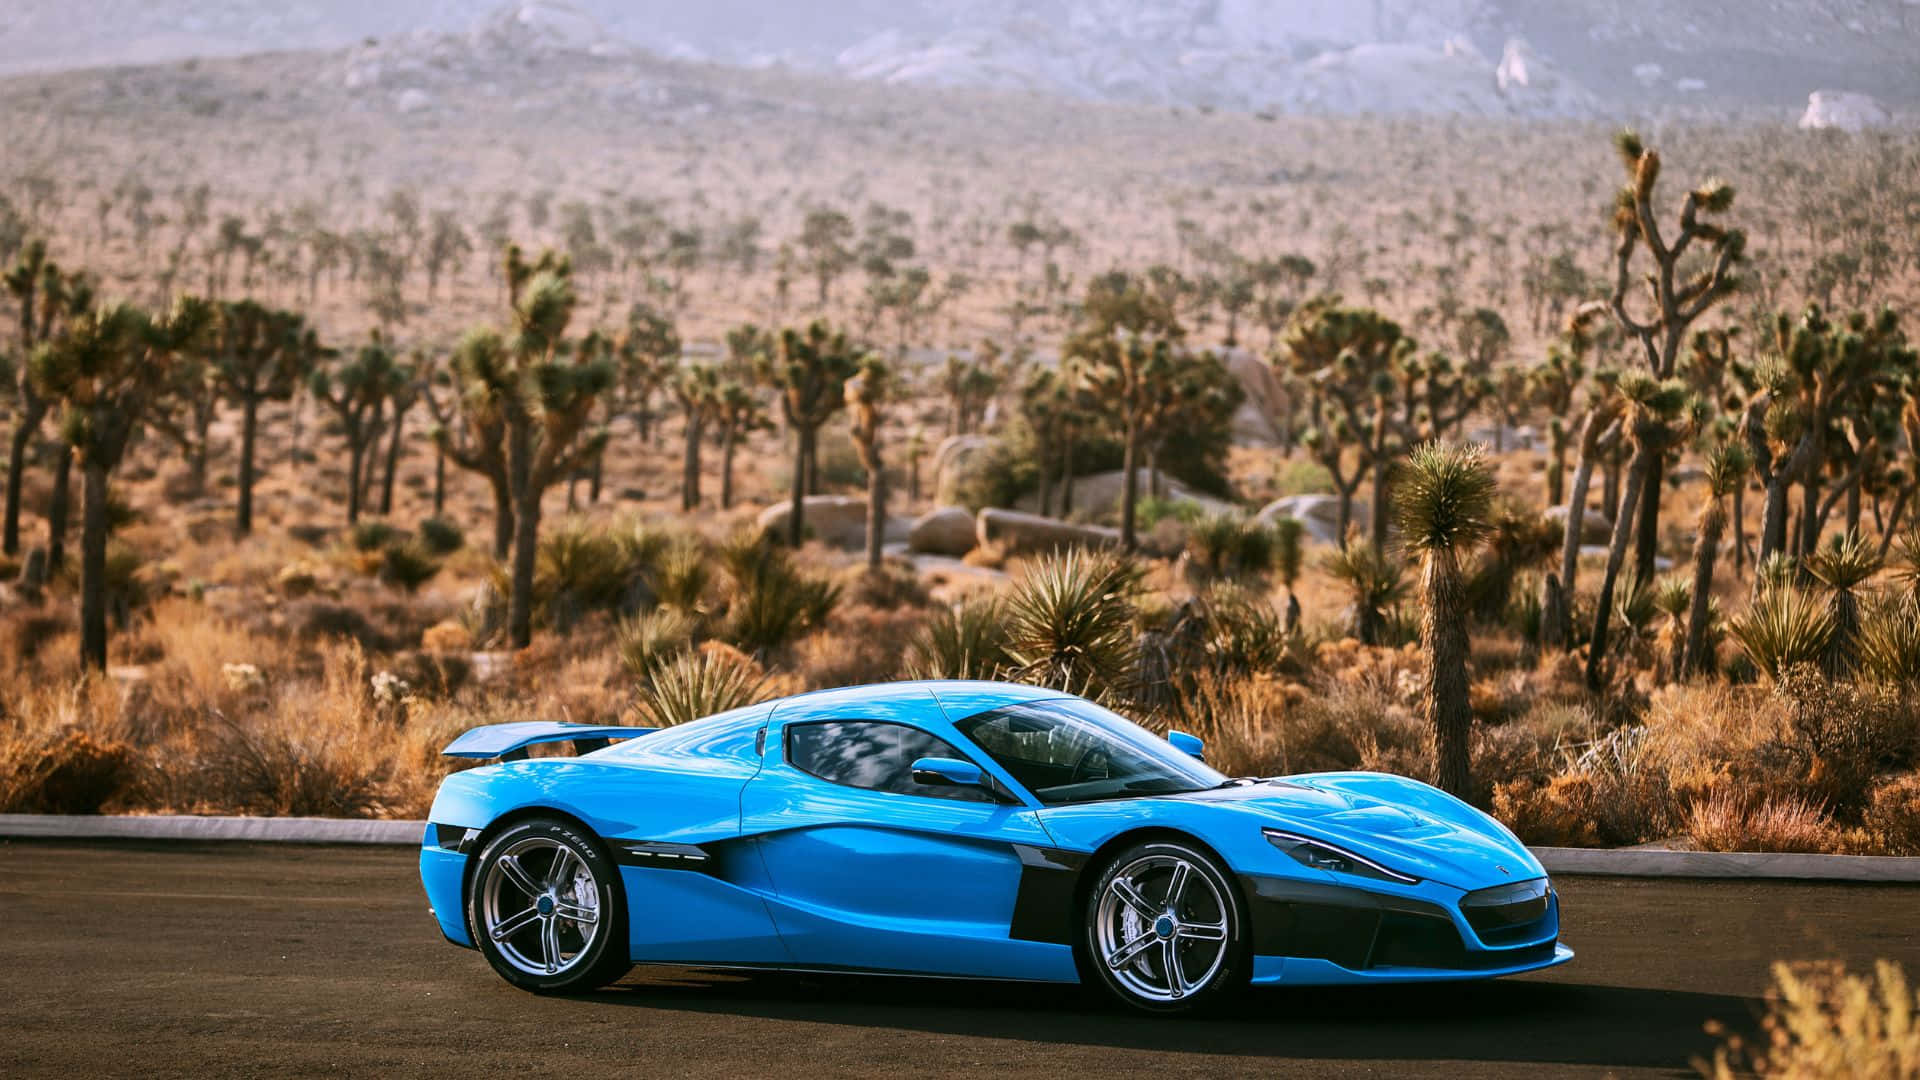 Rimac Nevera Electric Hypercar on the Road Wallpaper